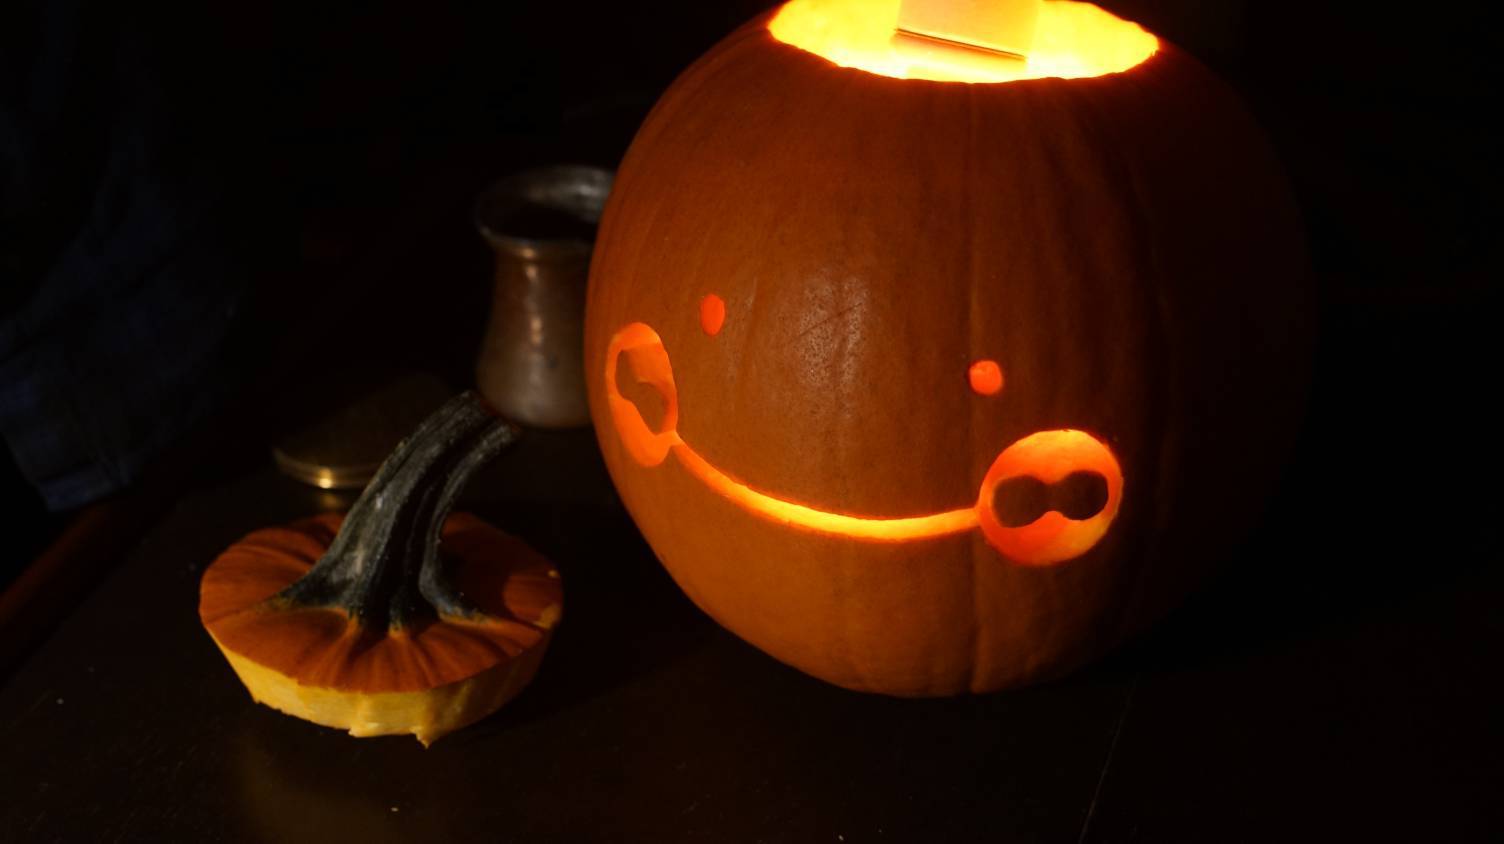 A photo of an Uxn face carved onto a pumpkin